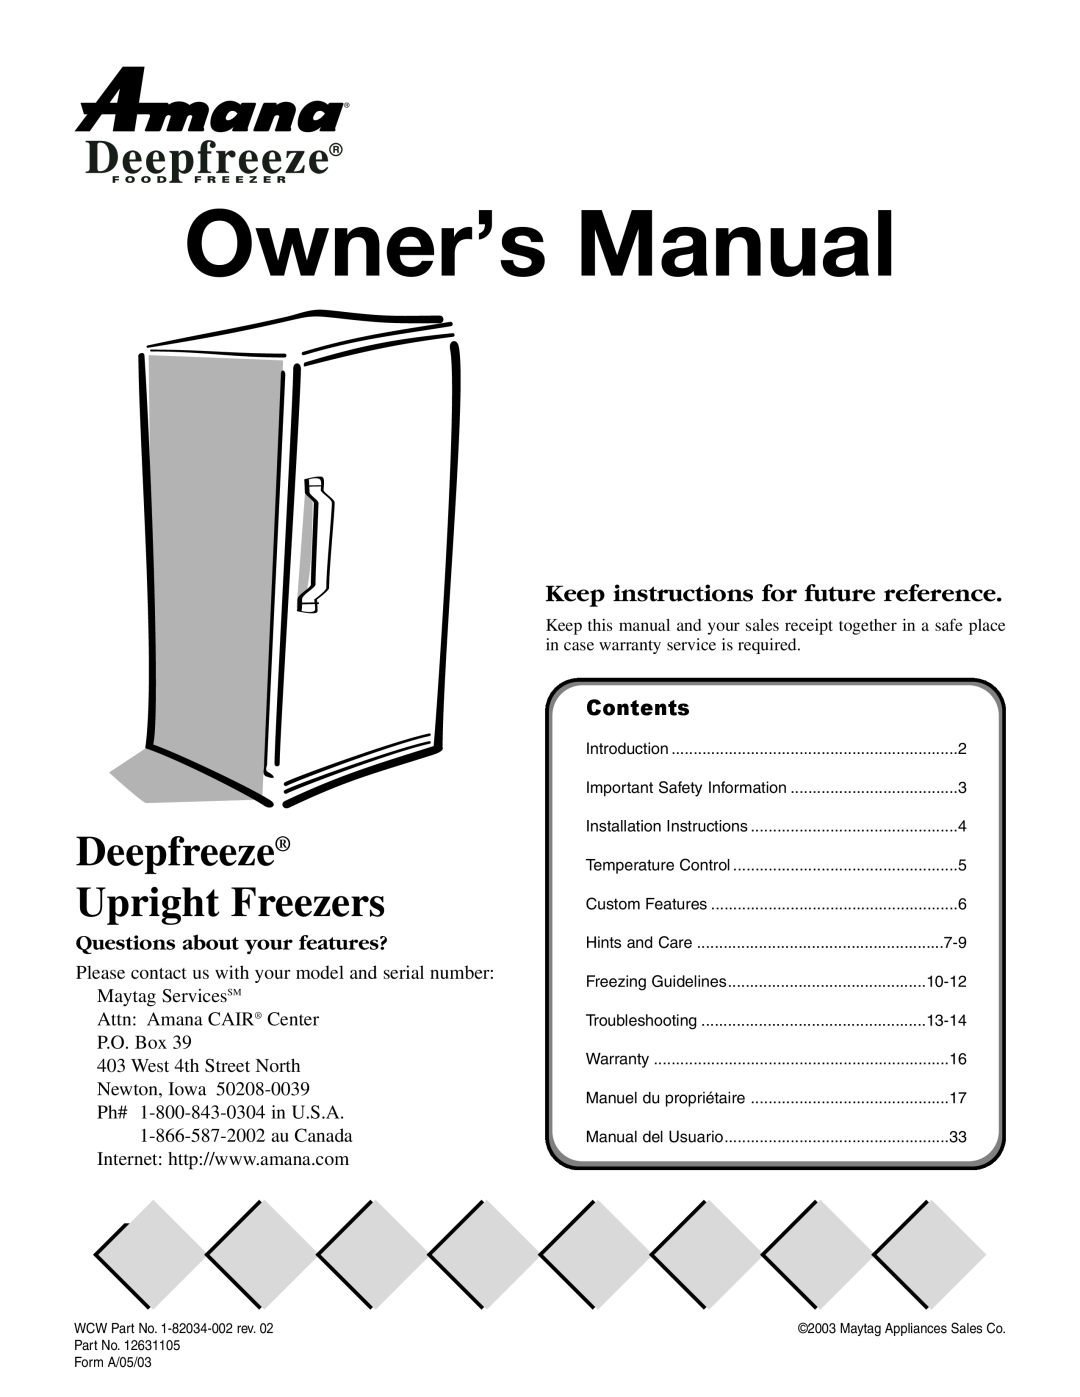 Amana 1-82034-002 owner manual Owner’s Manual, Deepfreeze Upright Freezers, Keep instructions for future reference 